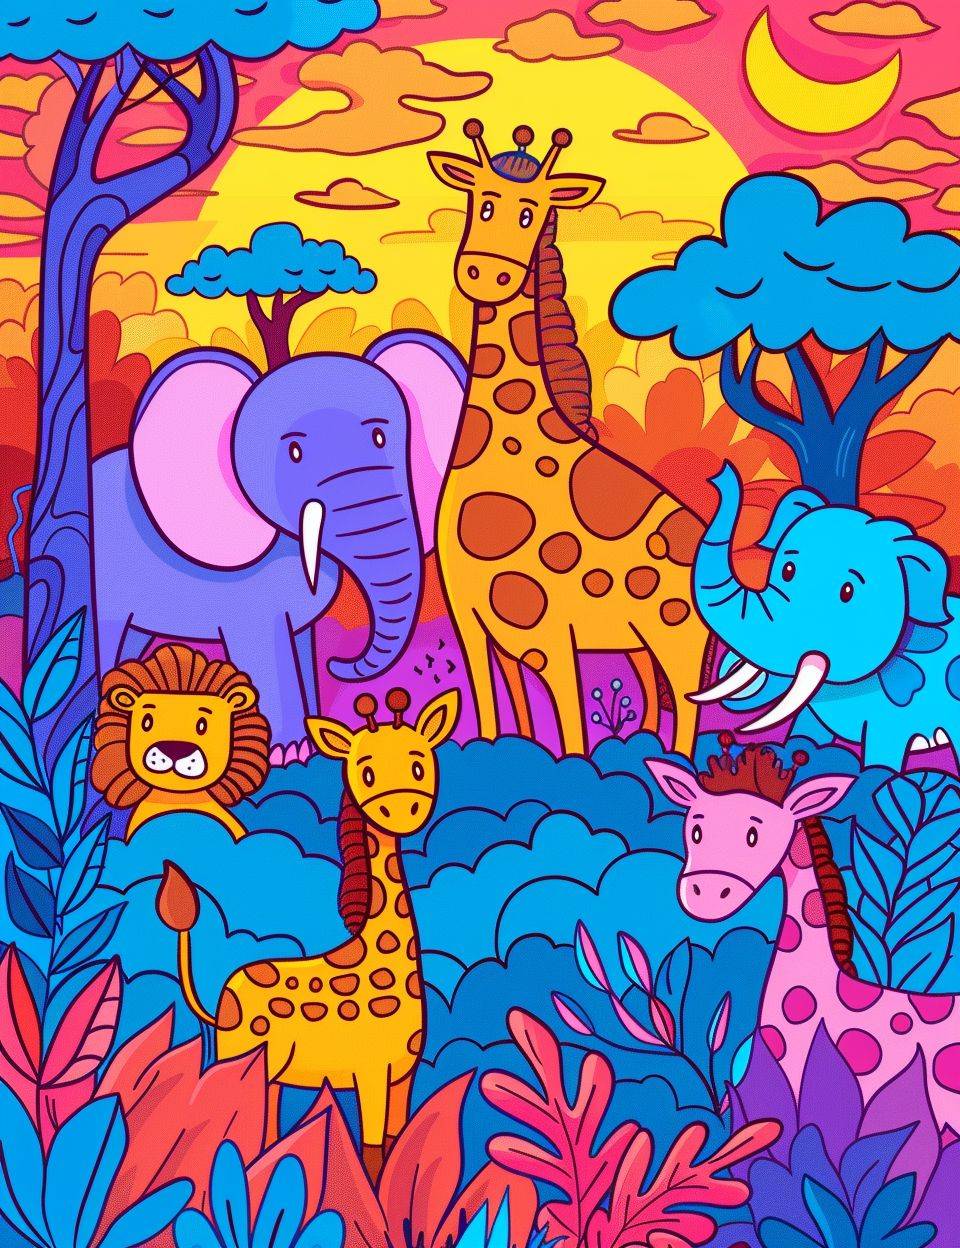 Generate a cartoon-style image of an African bush with happy wild animals, elephant, giraffe, lion, zebra, clean line art, no shading, use vibrant colors.